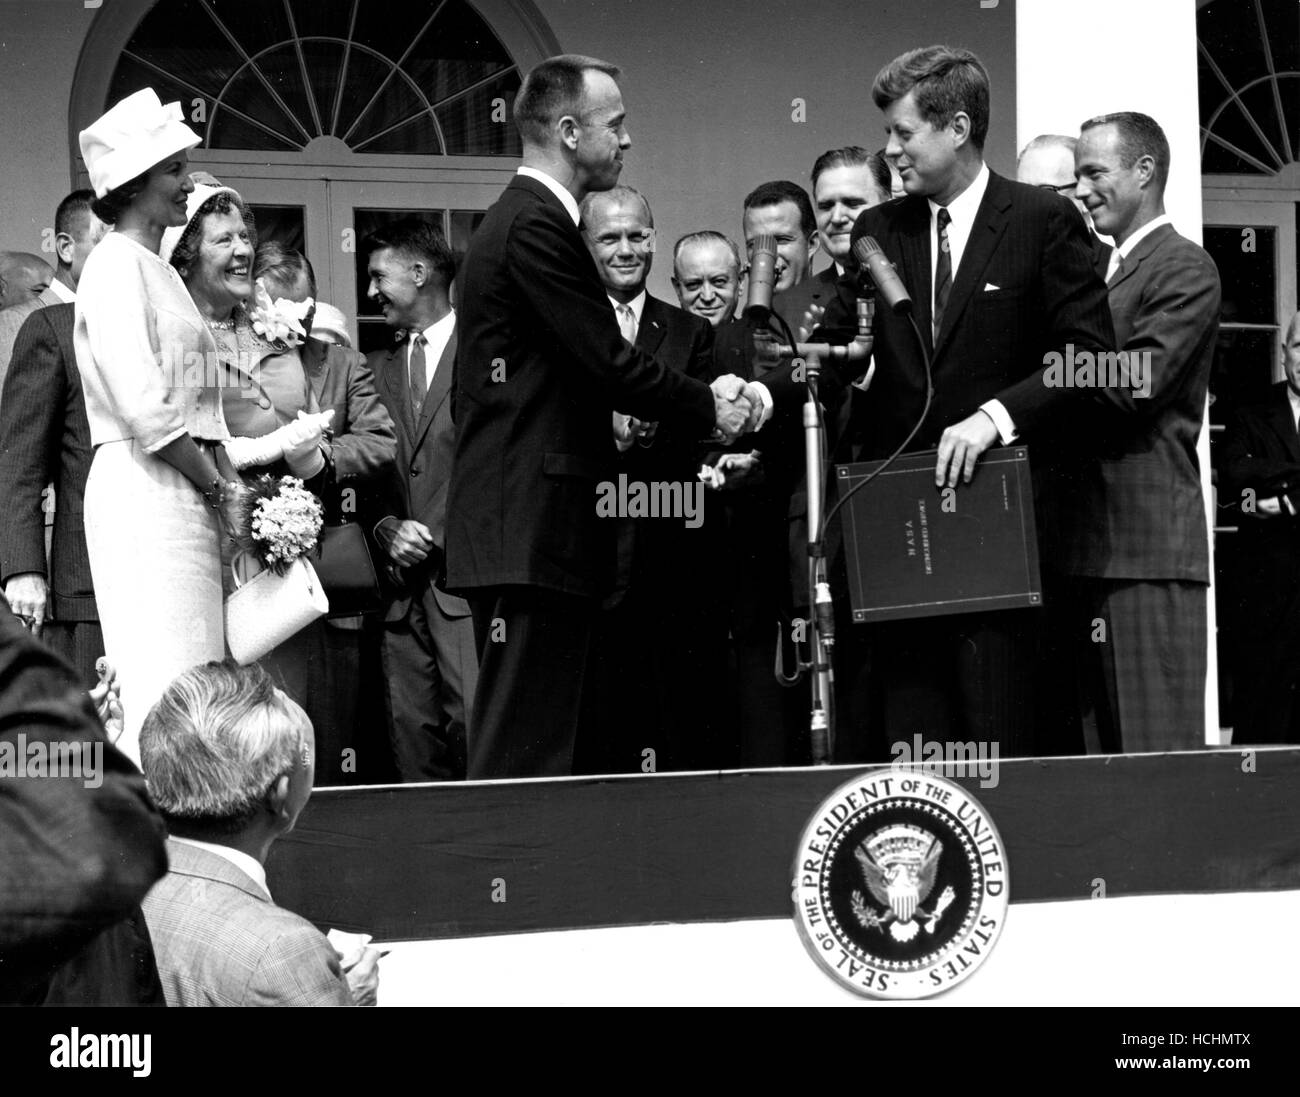 United States President John F. Kennedy congratulates astronaut Alan B. Shepard, Jr., the first American in space, on his historic May 5th, 1961 ride in the Freedom 7 spacecraft and presents him with the National Aeronautics and Space Administration (NASA) Distinguished Service Award, in Washington, DC on May 6, 1961. Shepard's wife, Louise (left in white dress and hat), and his mother were in attendance as well as the other six Mercury astronauts, including Colonel John H. Glenn, Jr. and other NASA officals, some visible in the background.Credit: NASA via CNP /MediaPunch Stock Photo